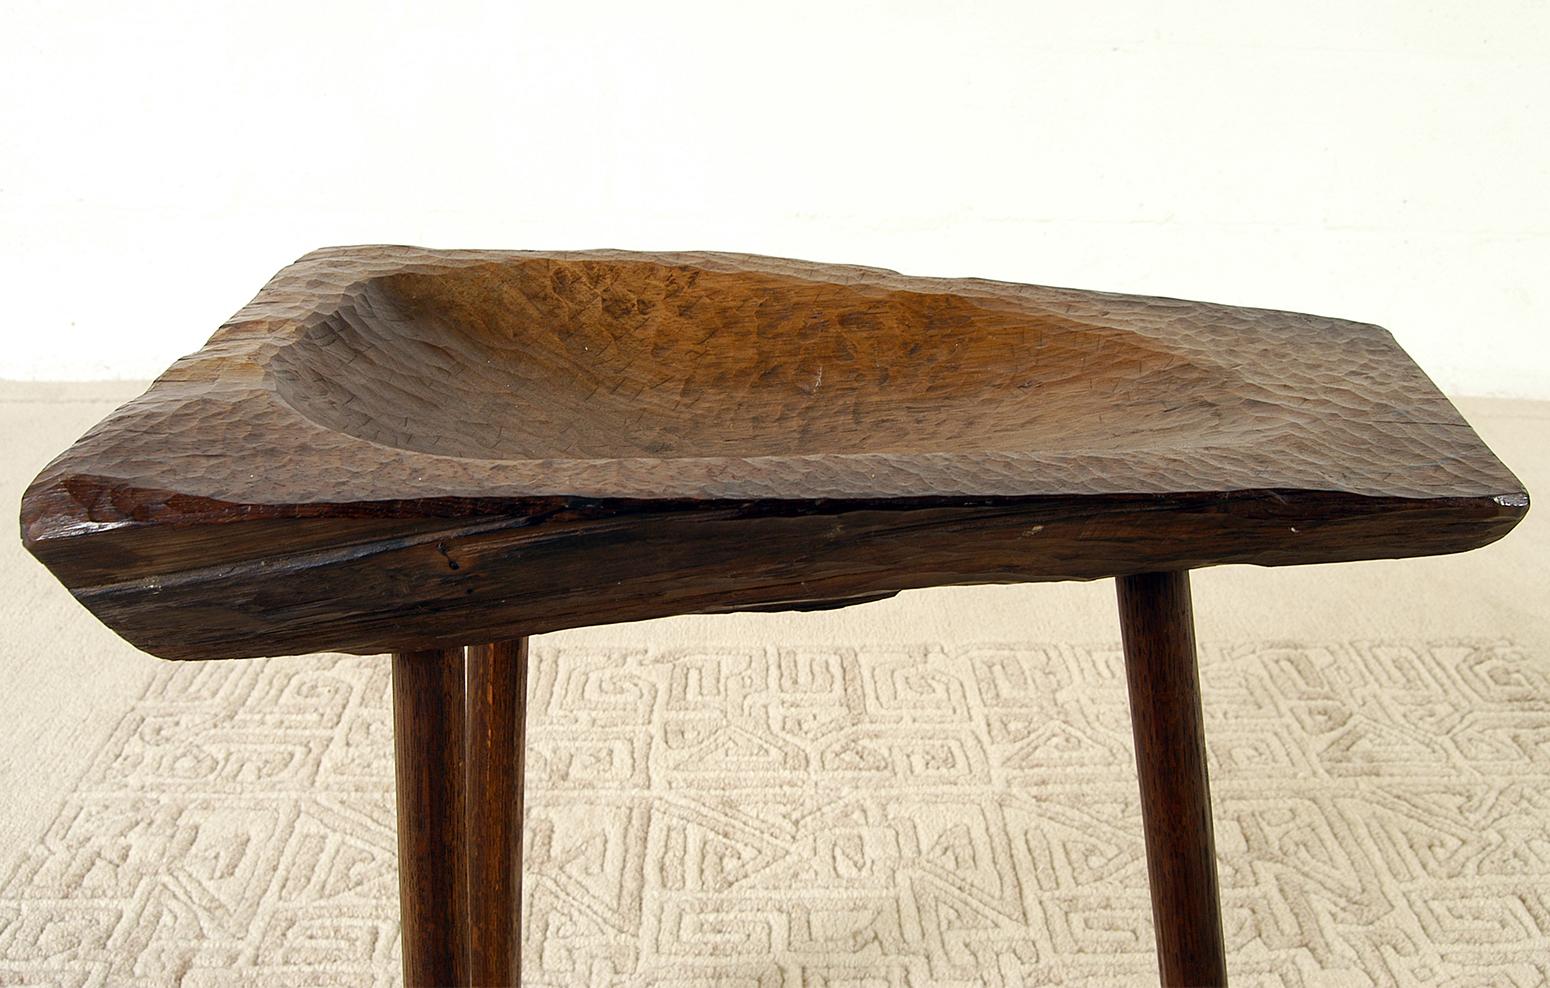 19c Folk Art Country Swedish Adze Carved Rosewood Tripod Table Bowl Decorative For Sale 9